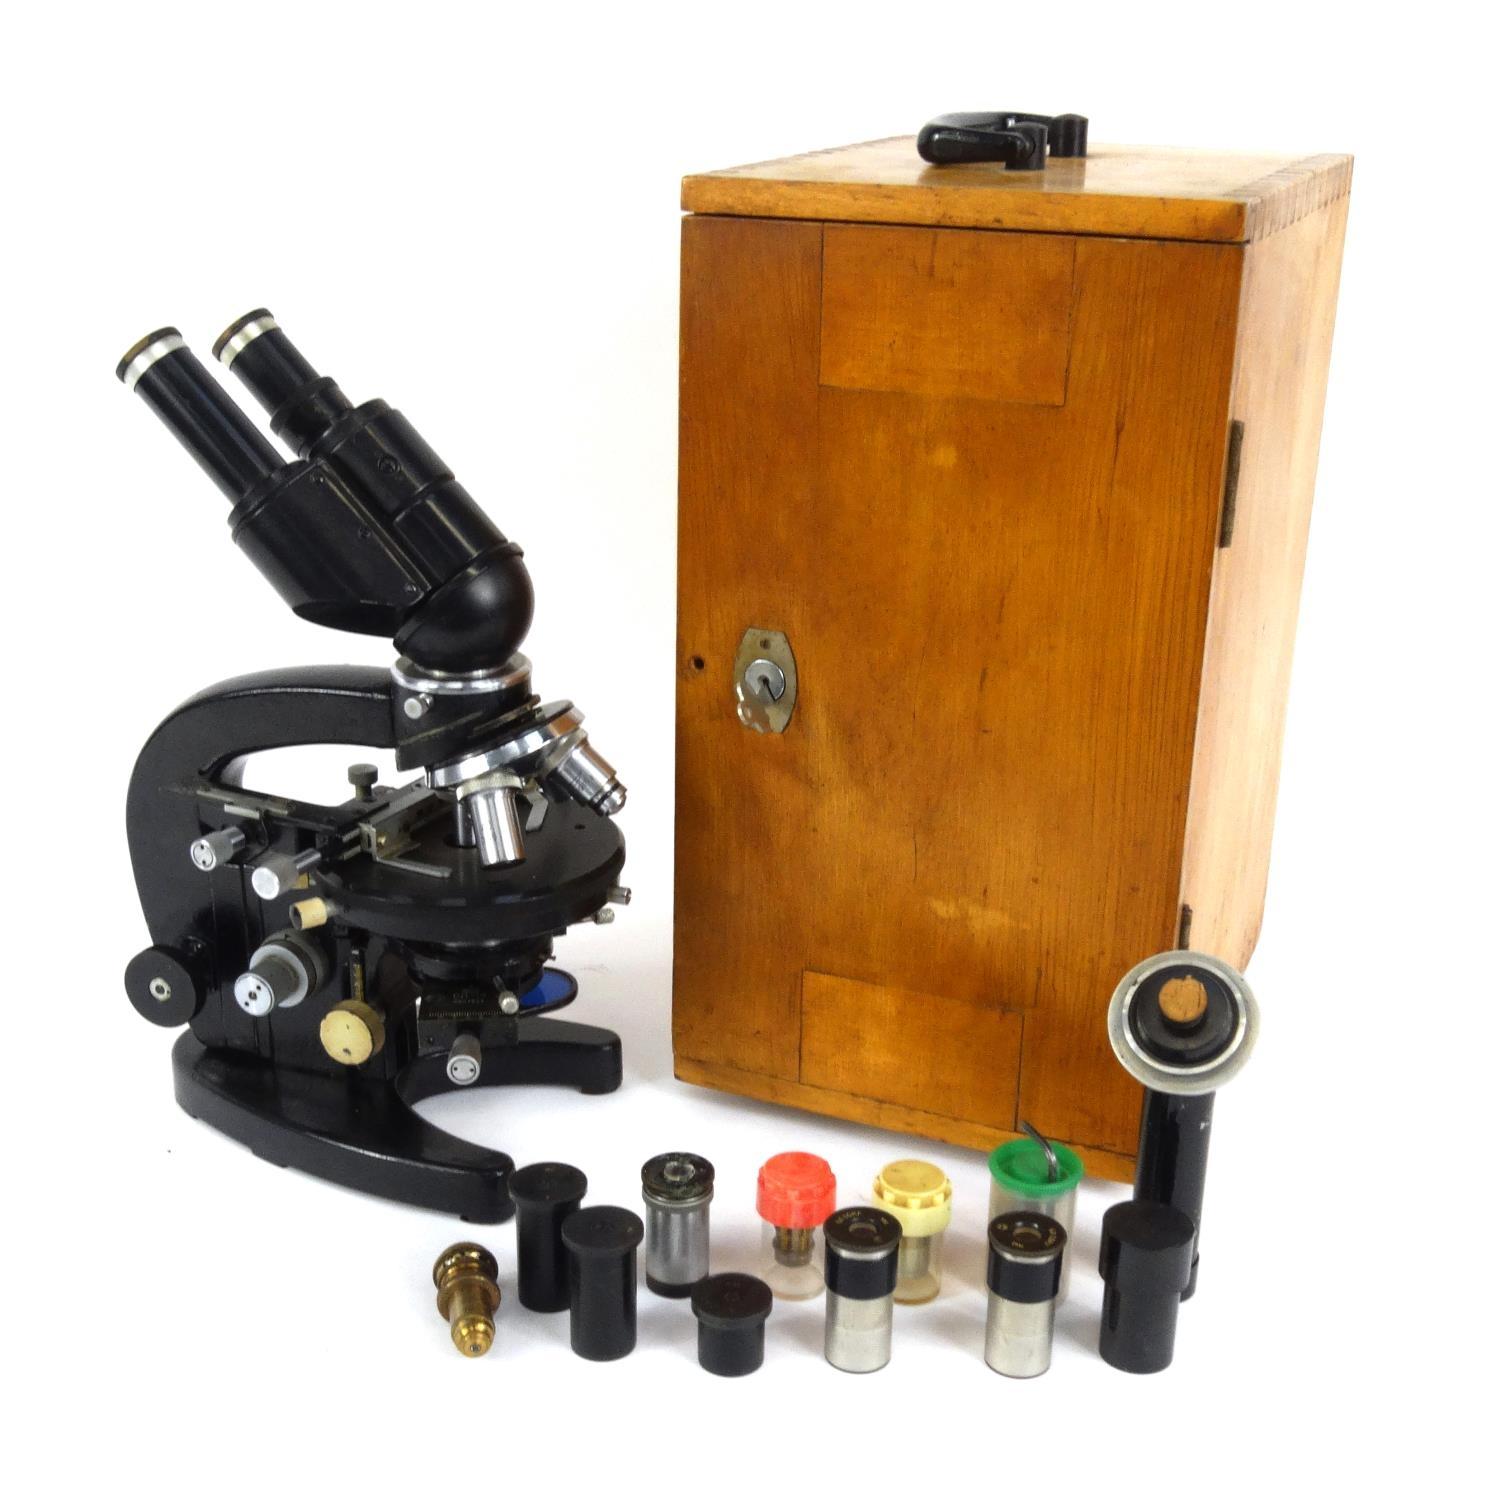 Russian microscope with extra lenses including some C. Baker of London examples, housed in a